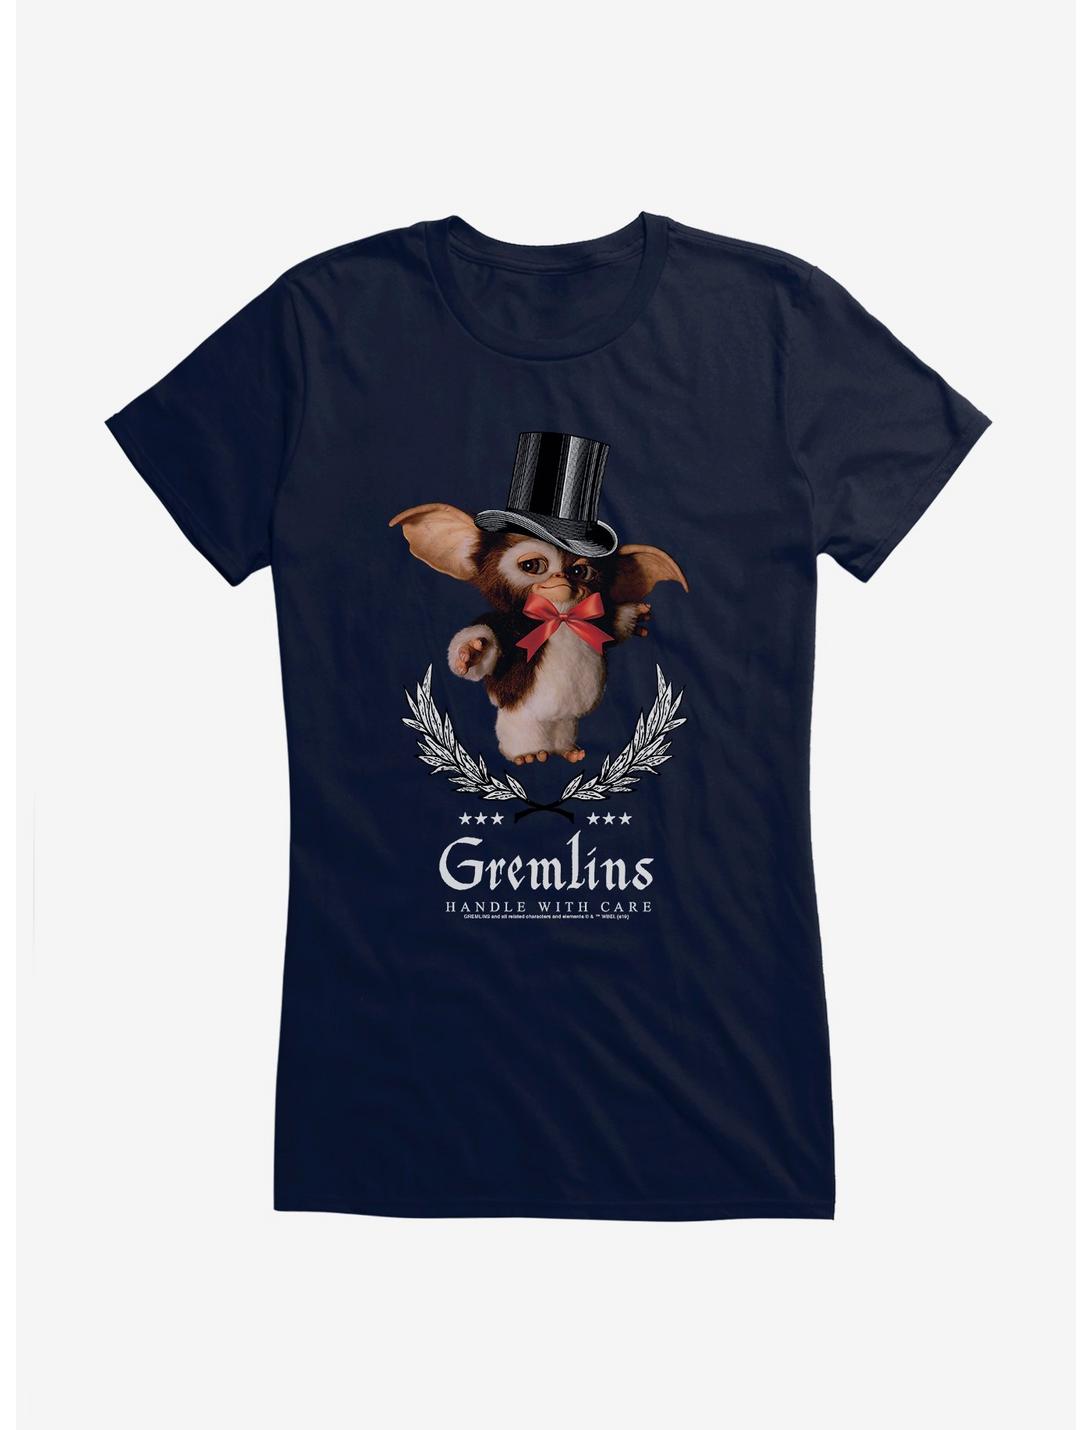 Gremlins Gizmo Handle With Care Girls T-Shirt, , hi-res